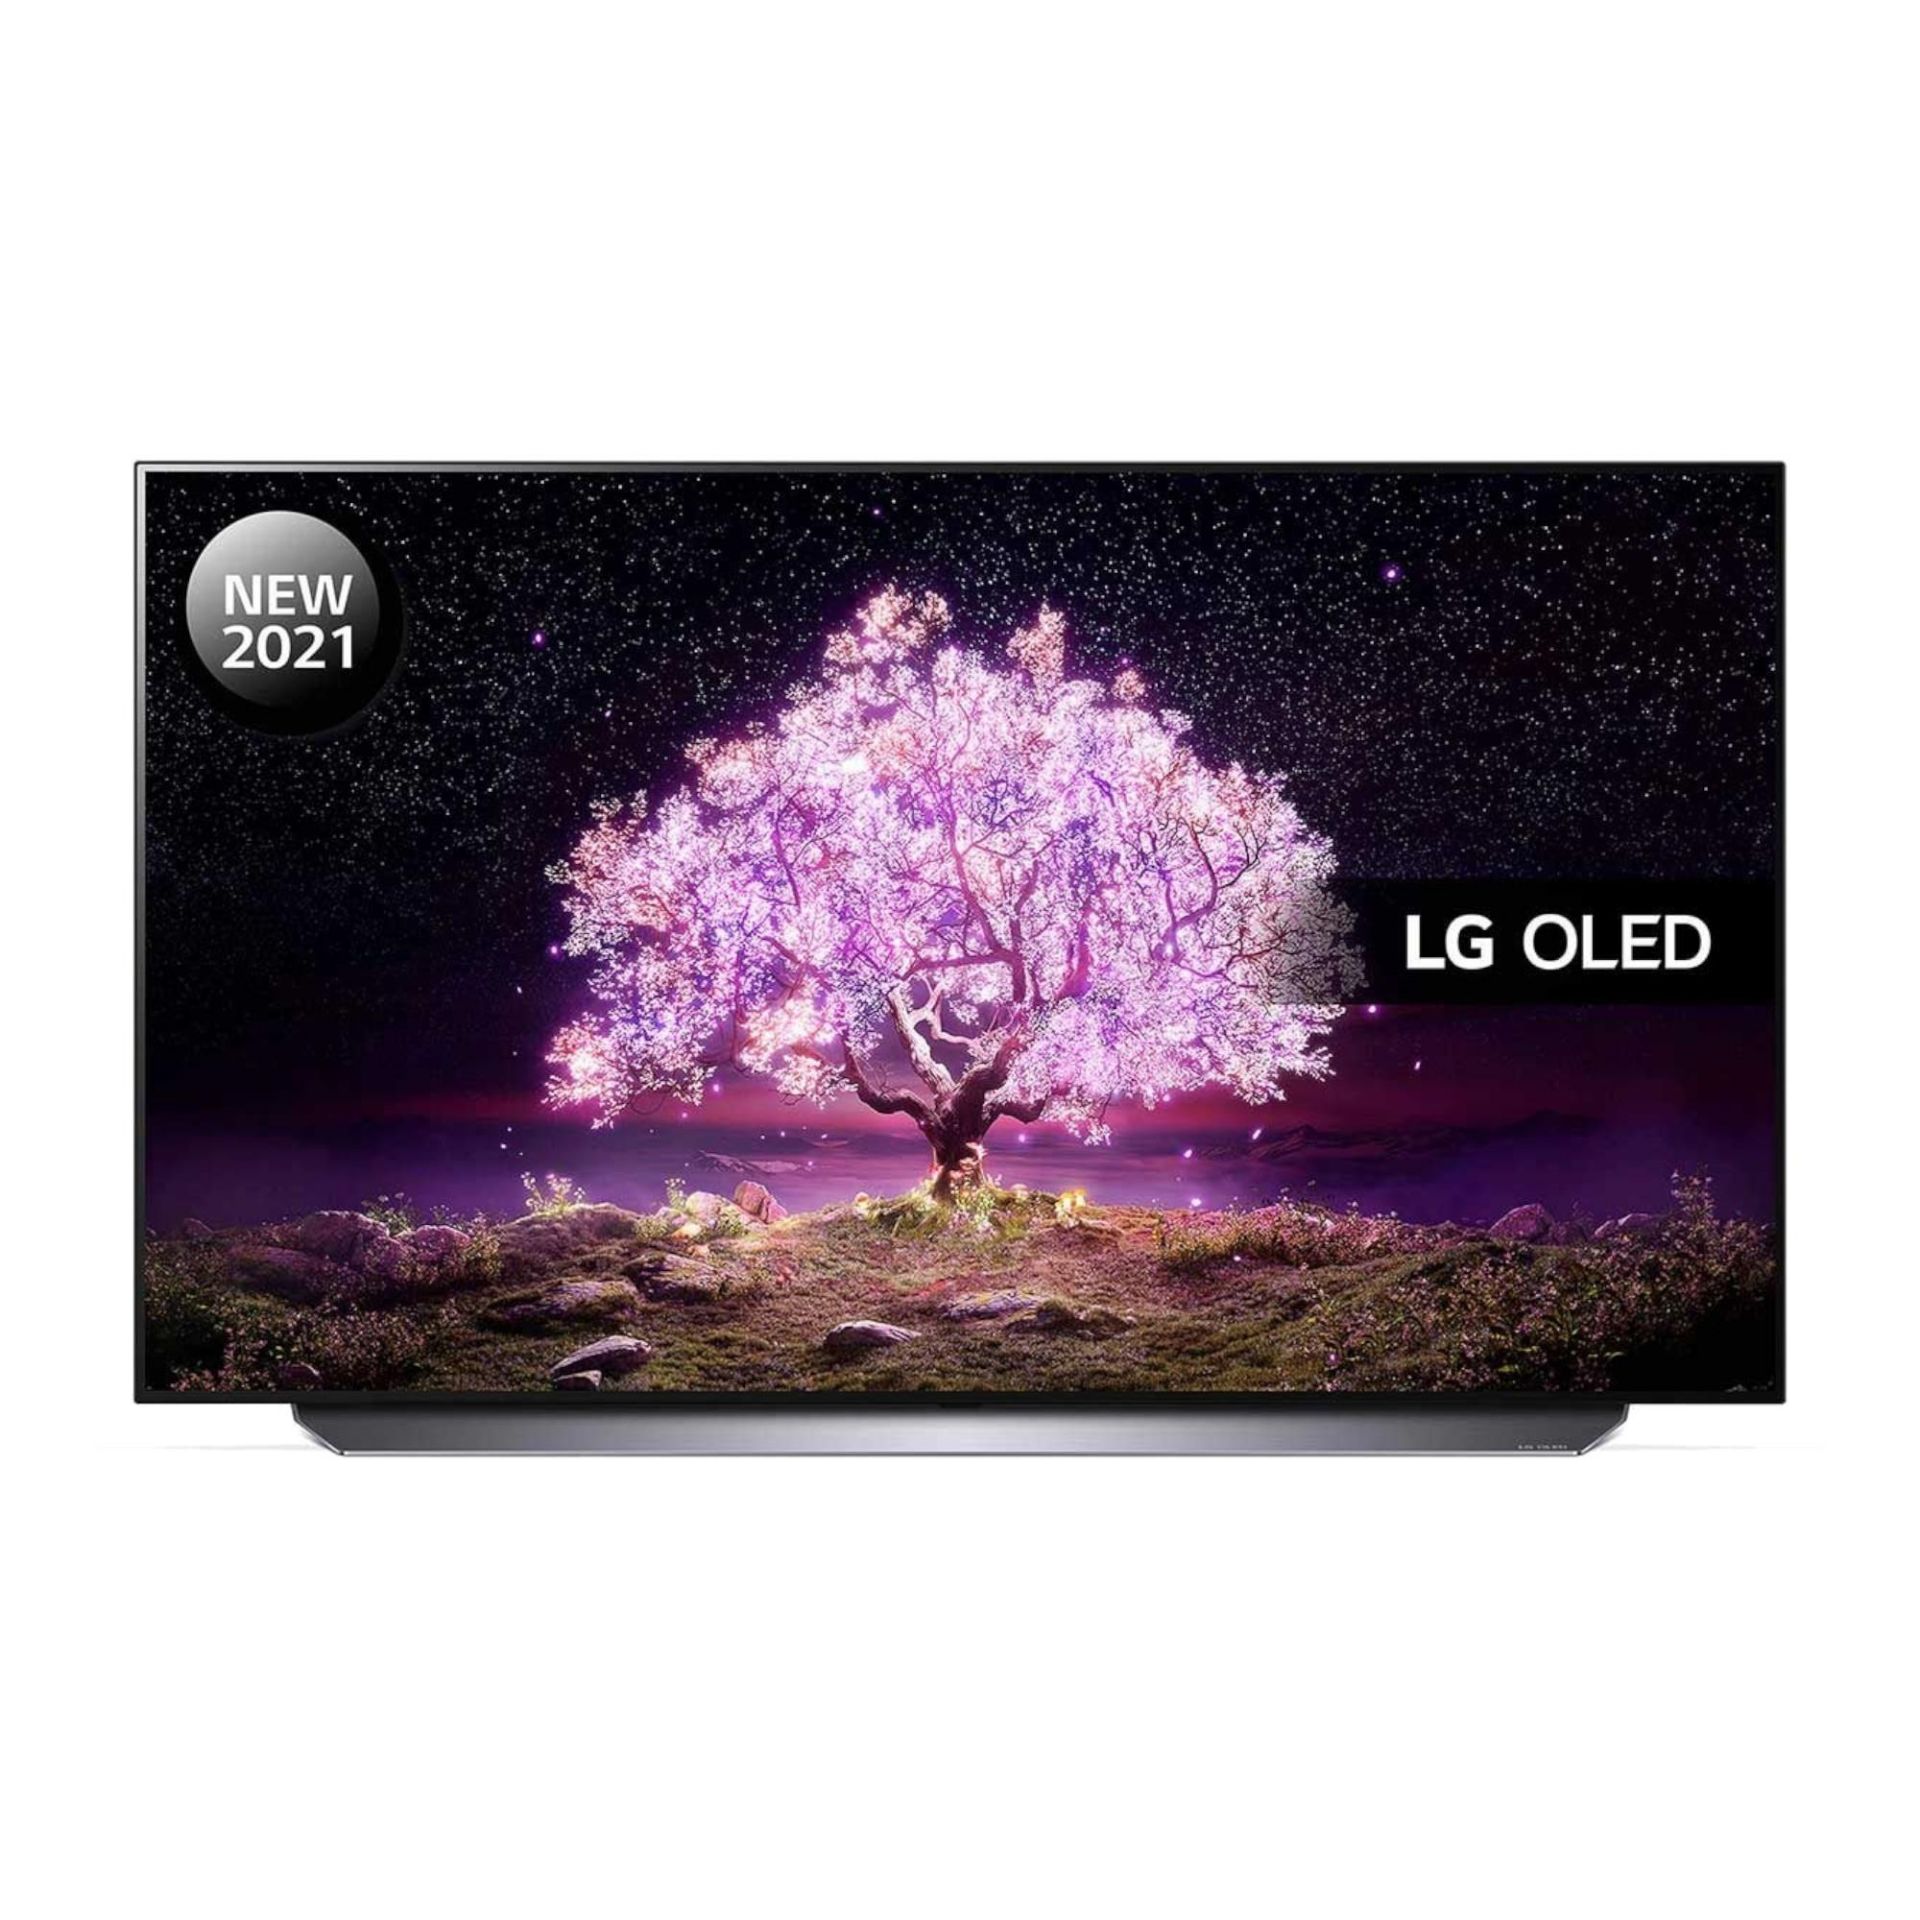 1 BOXED LG OLED55C14LB 55 INCH OLED 4K ULTRA HD HDR SMART TV FREEVIEW PLAY FREESAT WITH STAND AND